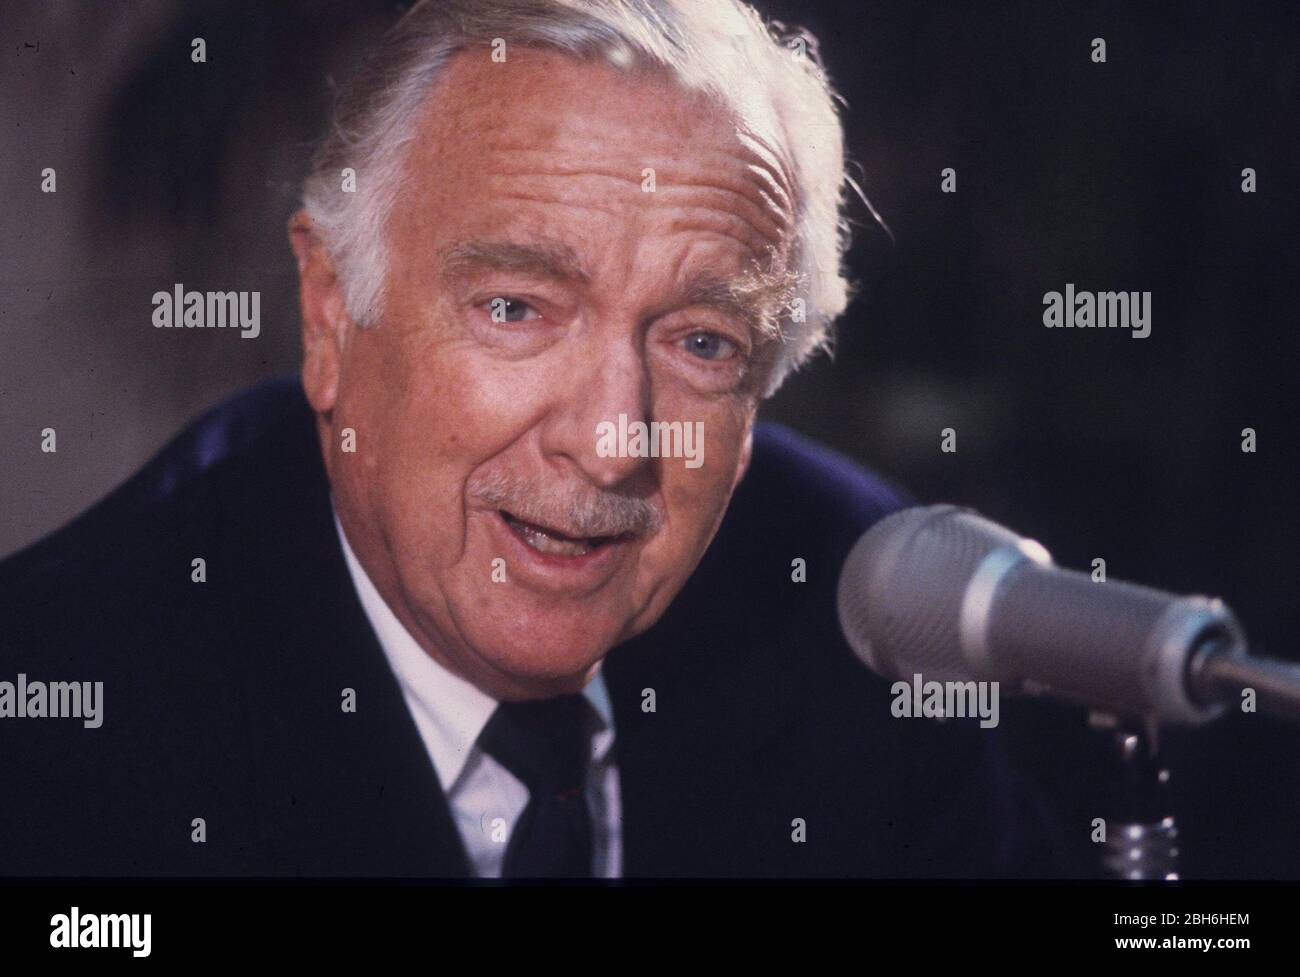 Austin, Texas USA, May 1989: CBS newsman Walter Cronkite speaks at a press conference for the Lower Colorado River Authority after narrating a video on environmental protection for the central Texas agency.  ©Bob Daemmrich Stock Photo